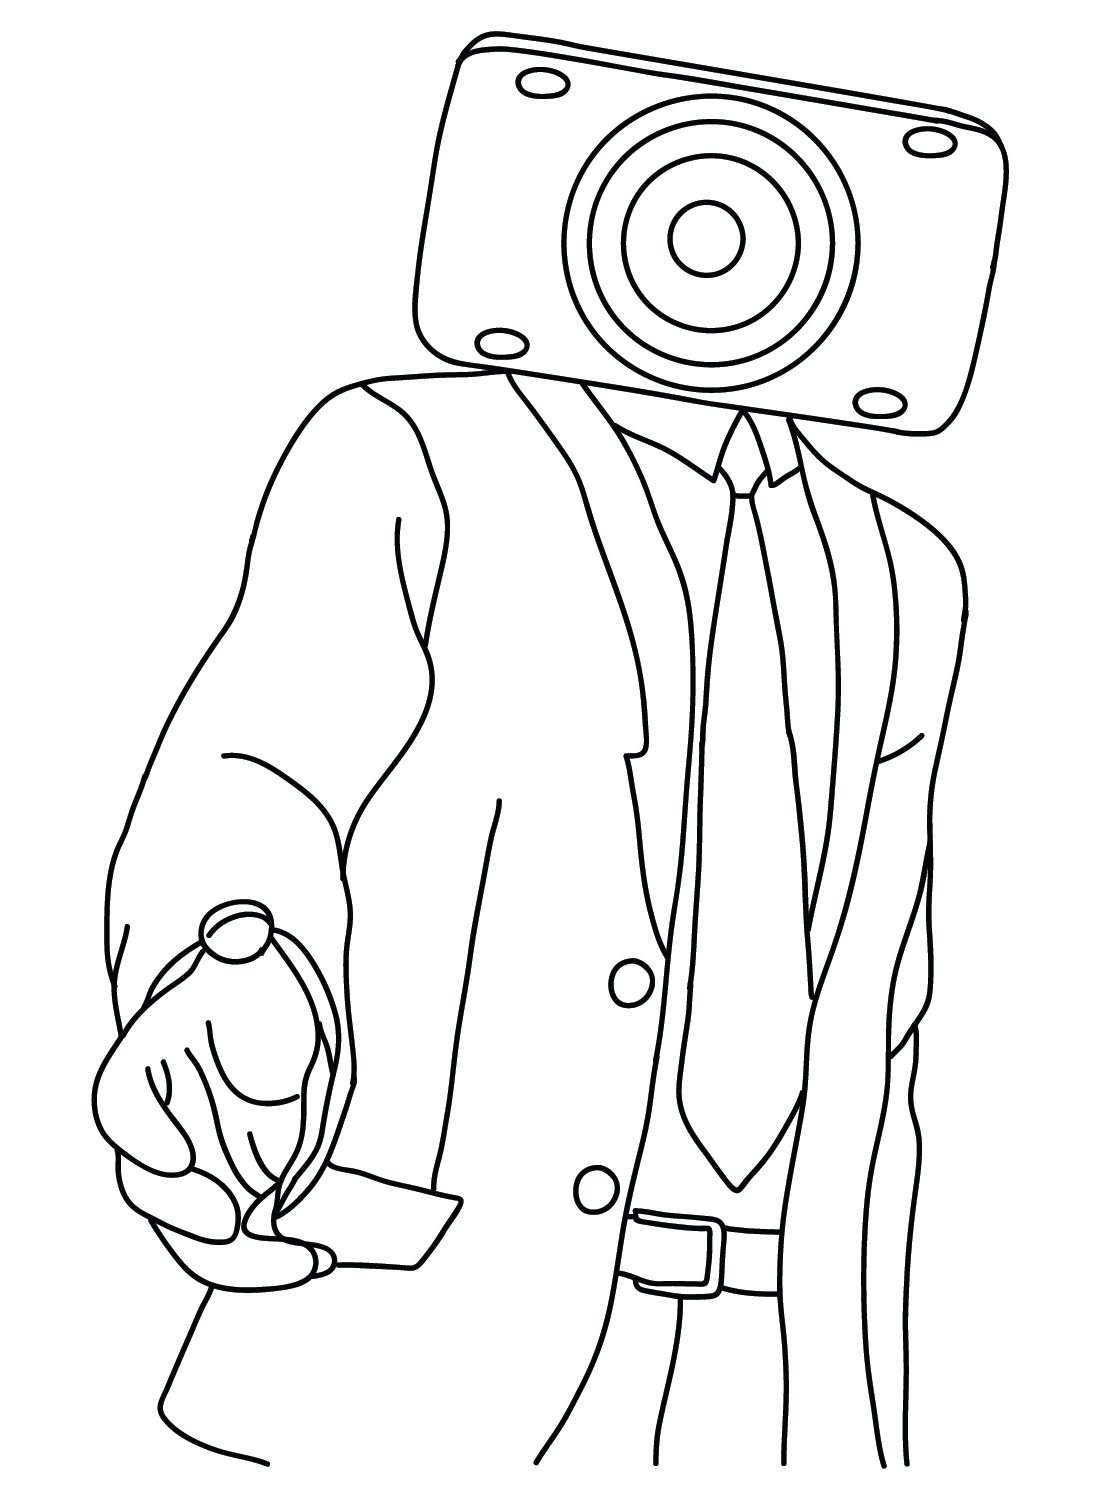 Speakerman Coloring Pages - Free Printable Coloring Pages